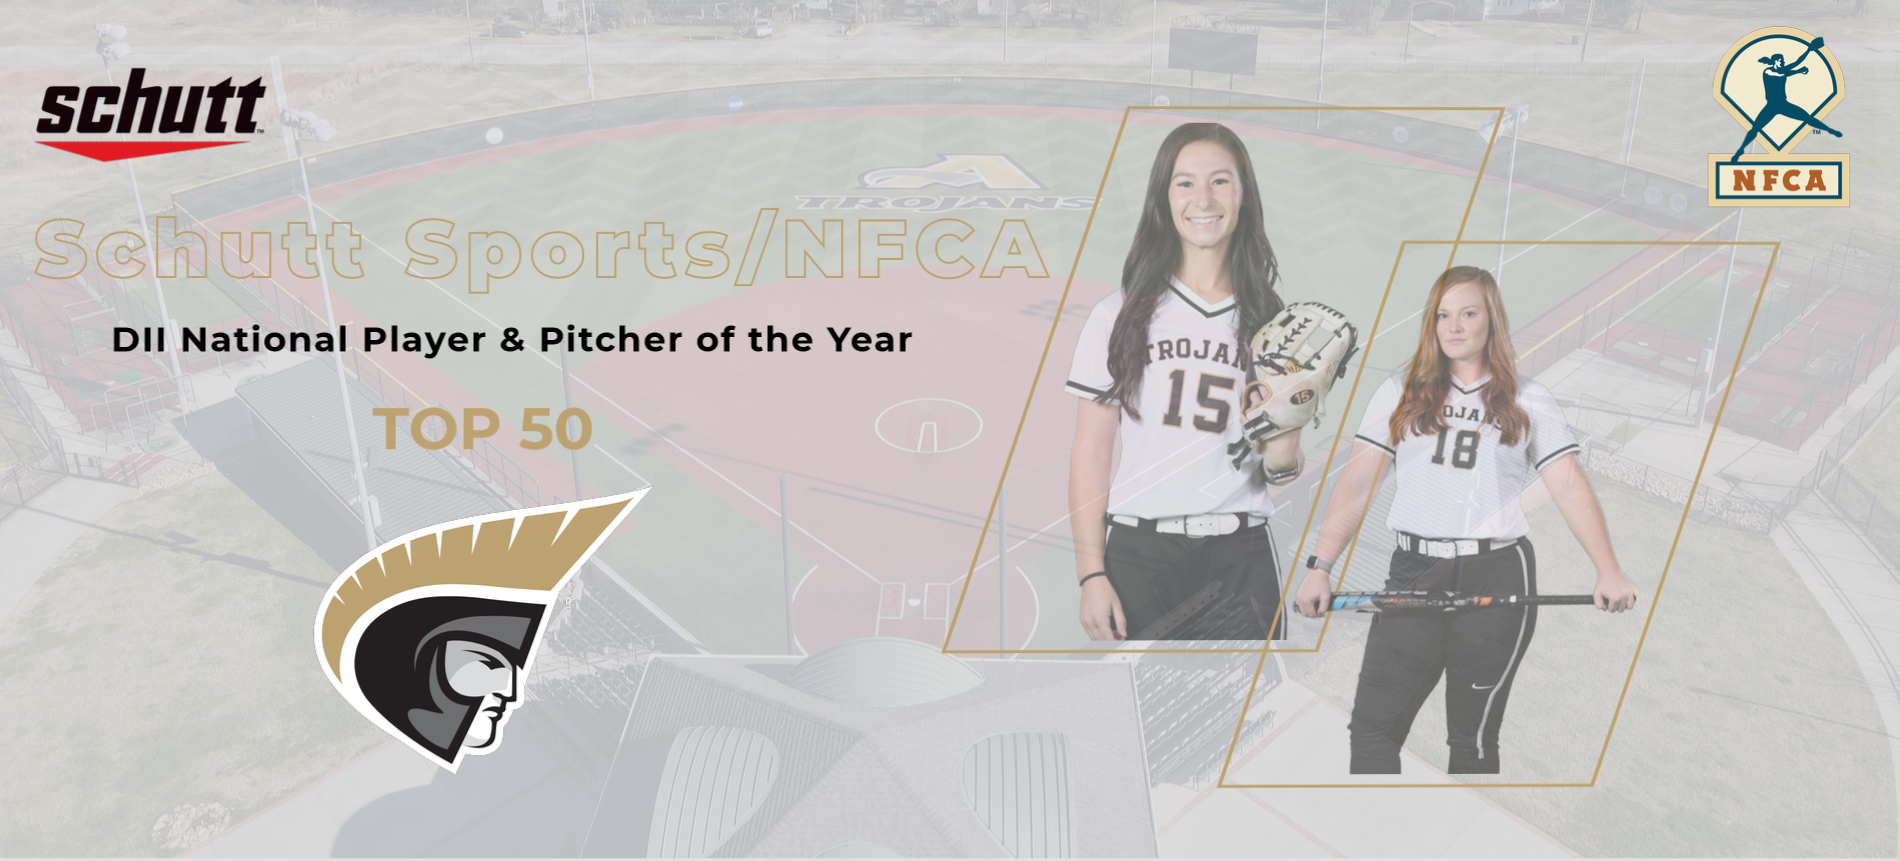 Maxwell and Boatner Earn Spot On 2022 Schutt Sports/NFCA DII National Player & Pitcher of the Year Top 50 List